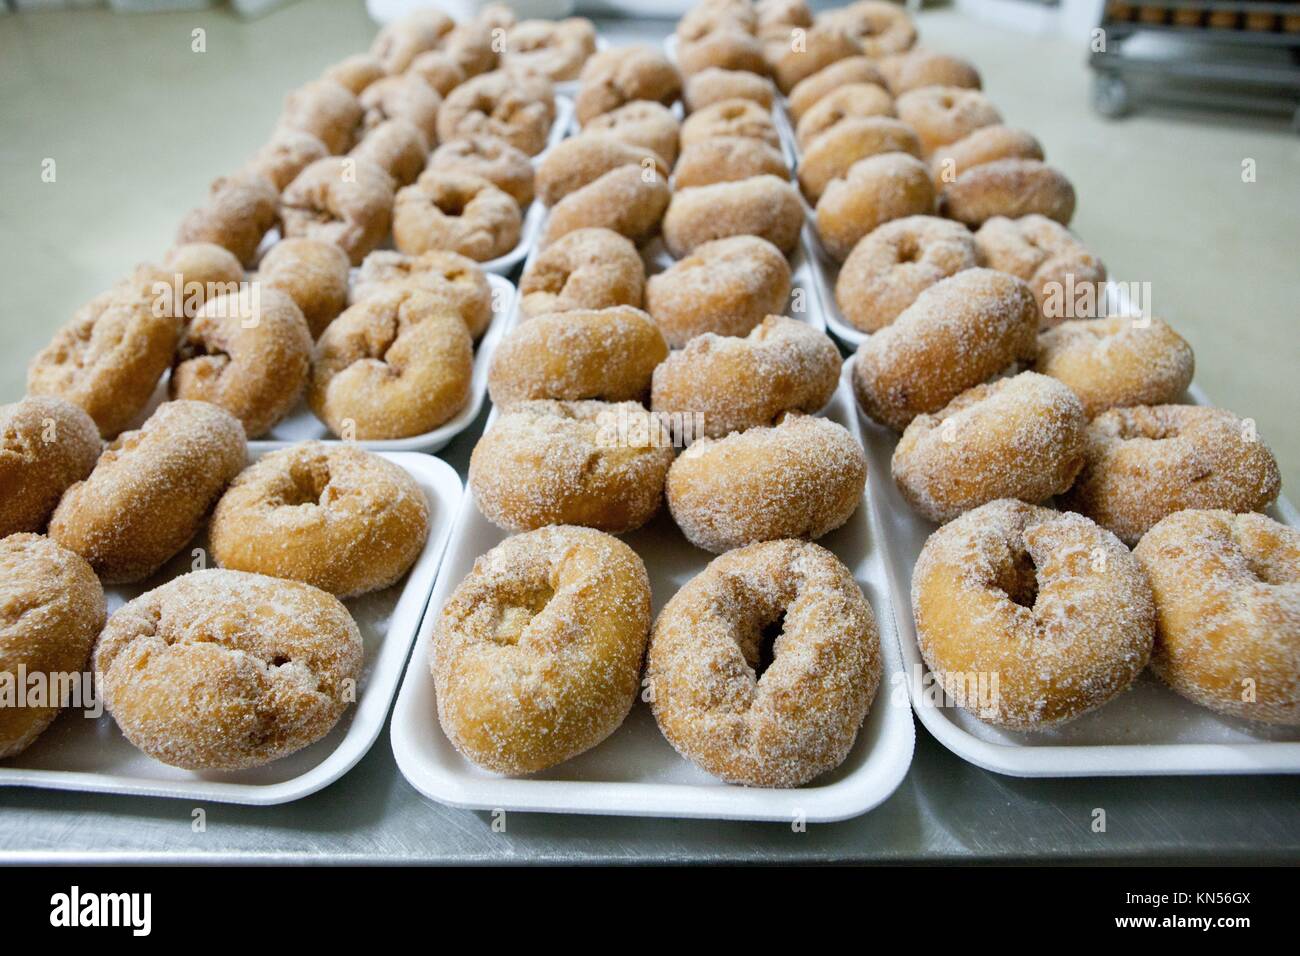 Trays of spanish typical fried donuts or roscas fritas. Stock Photo